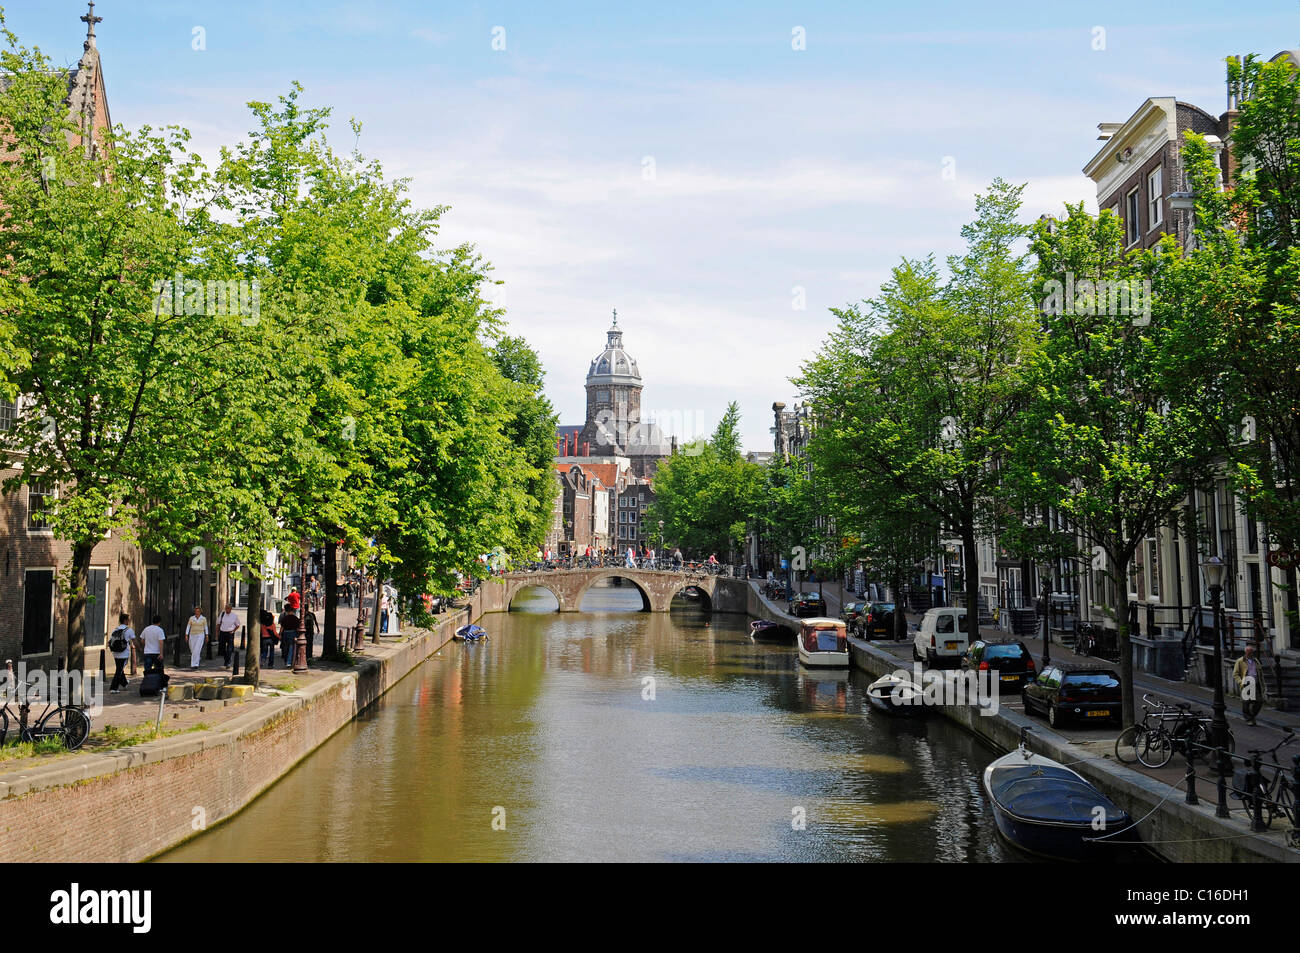 St Nicolaas Kerk, église, canal, Amsterdam, Hollande, Pays-Bas, Europe Banque D'Images